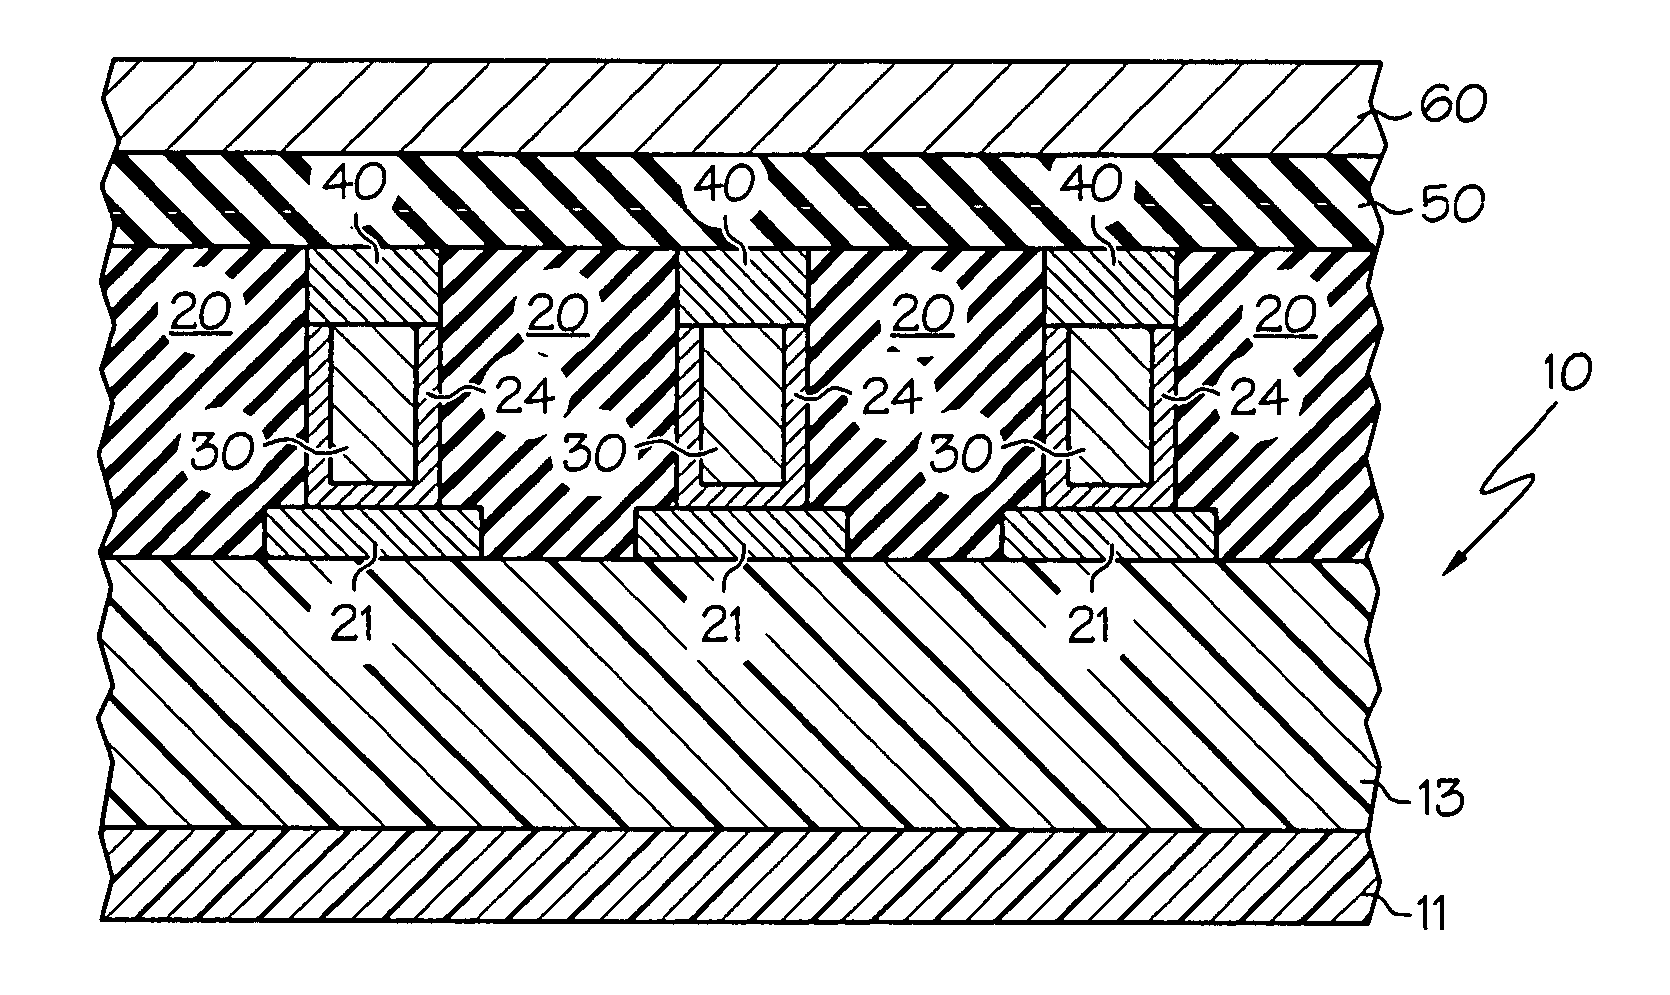 Electroless plating of metal caps for chalcogenide-based memory devices